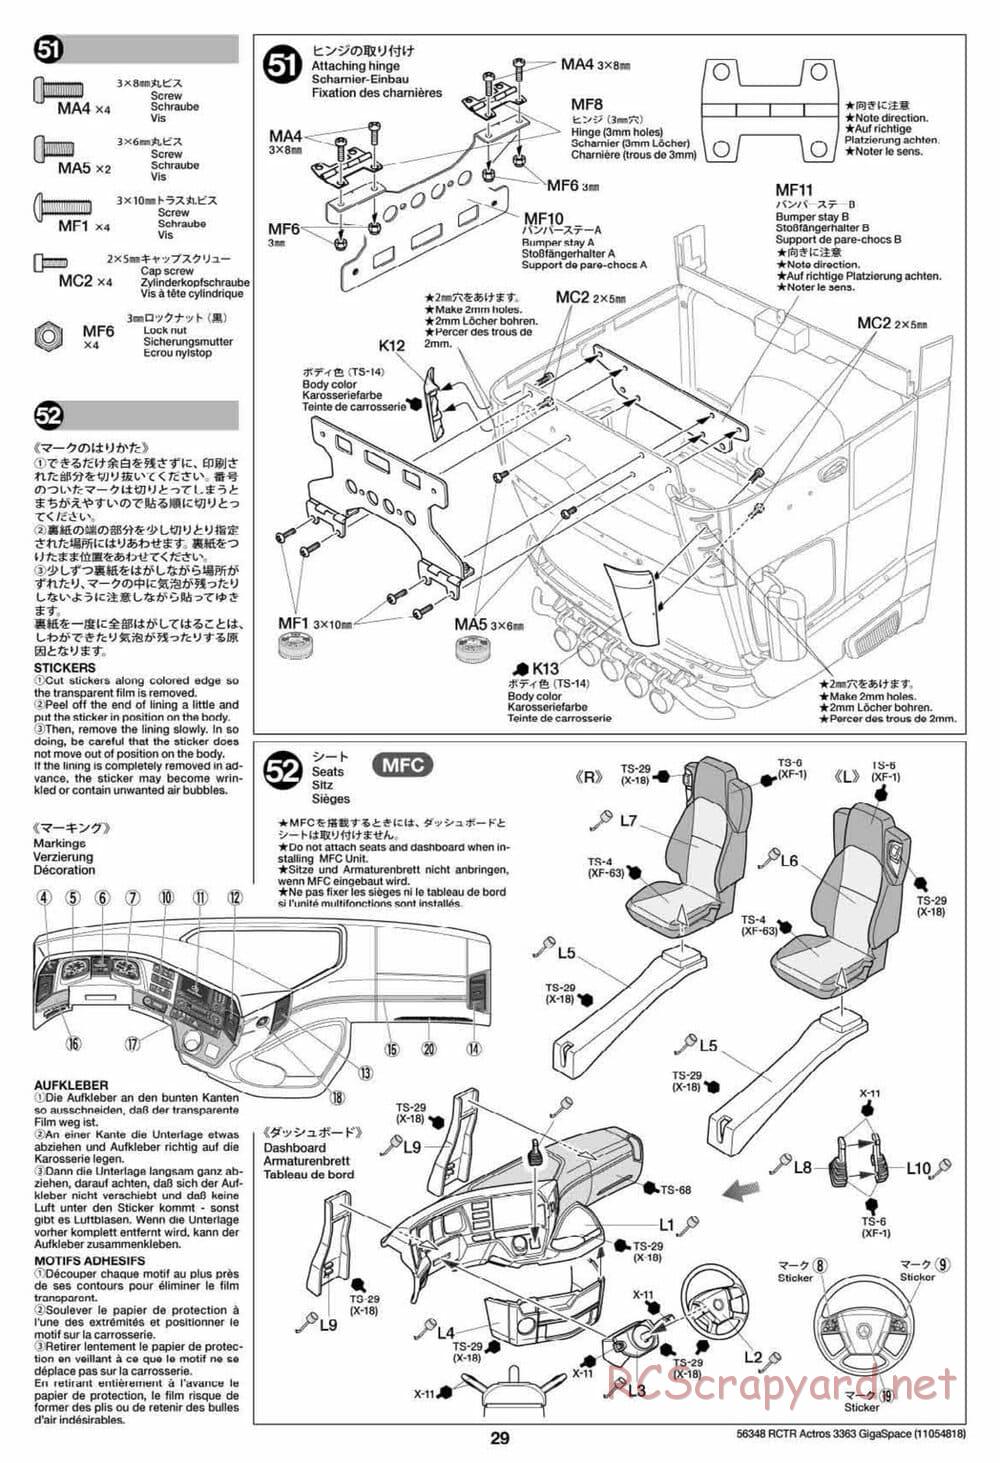 Tamiya - Mercedes-Benz Actros 3363 6x4 GigaSpace Tractor Truck Chassis - Manual - Page 29